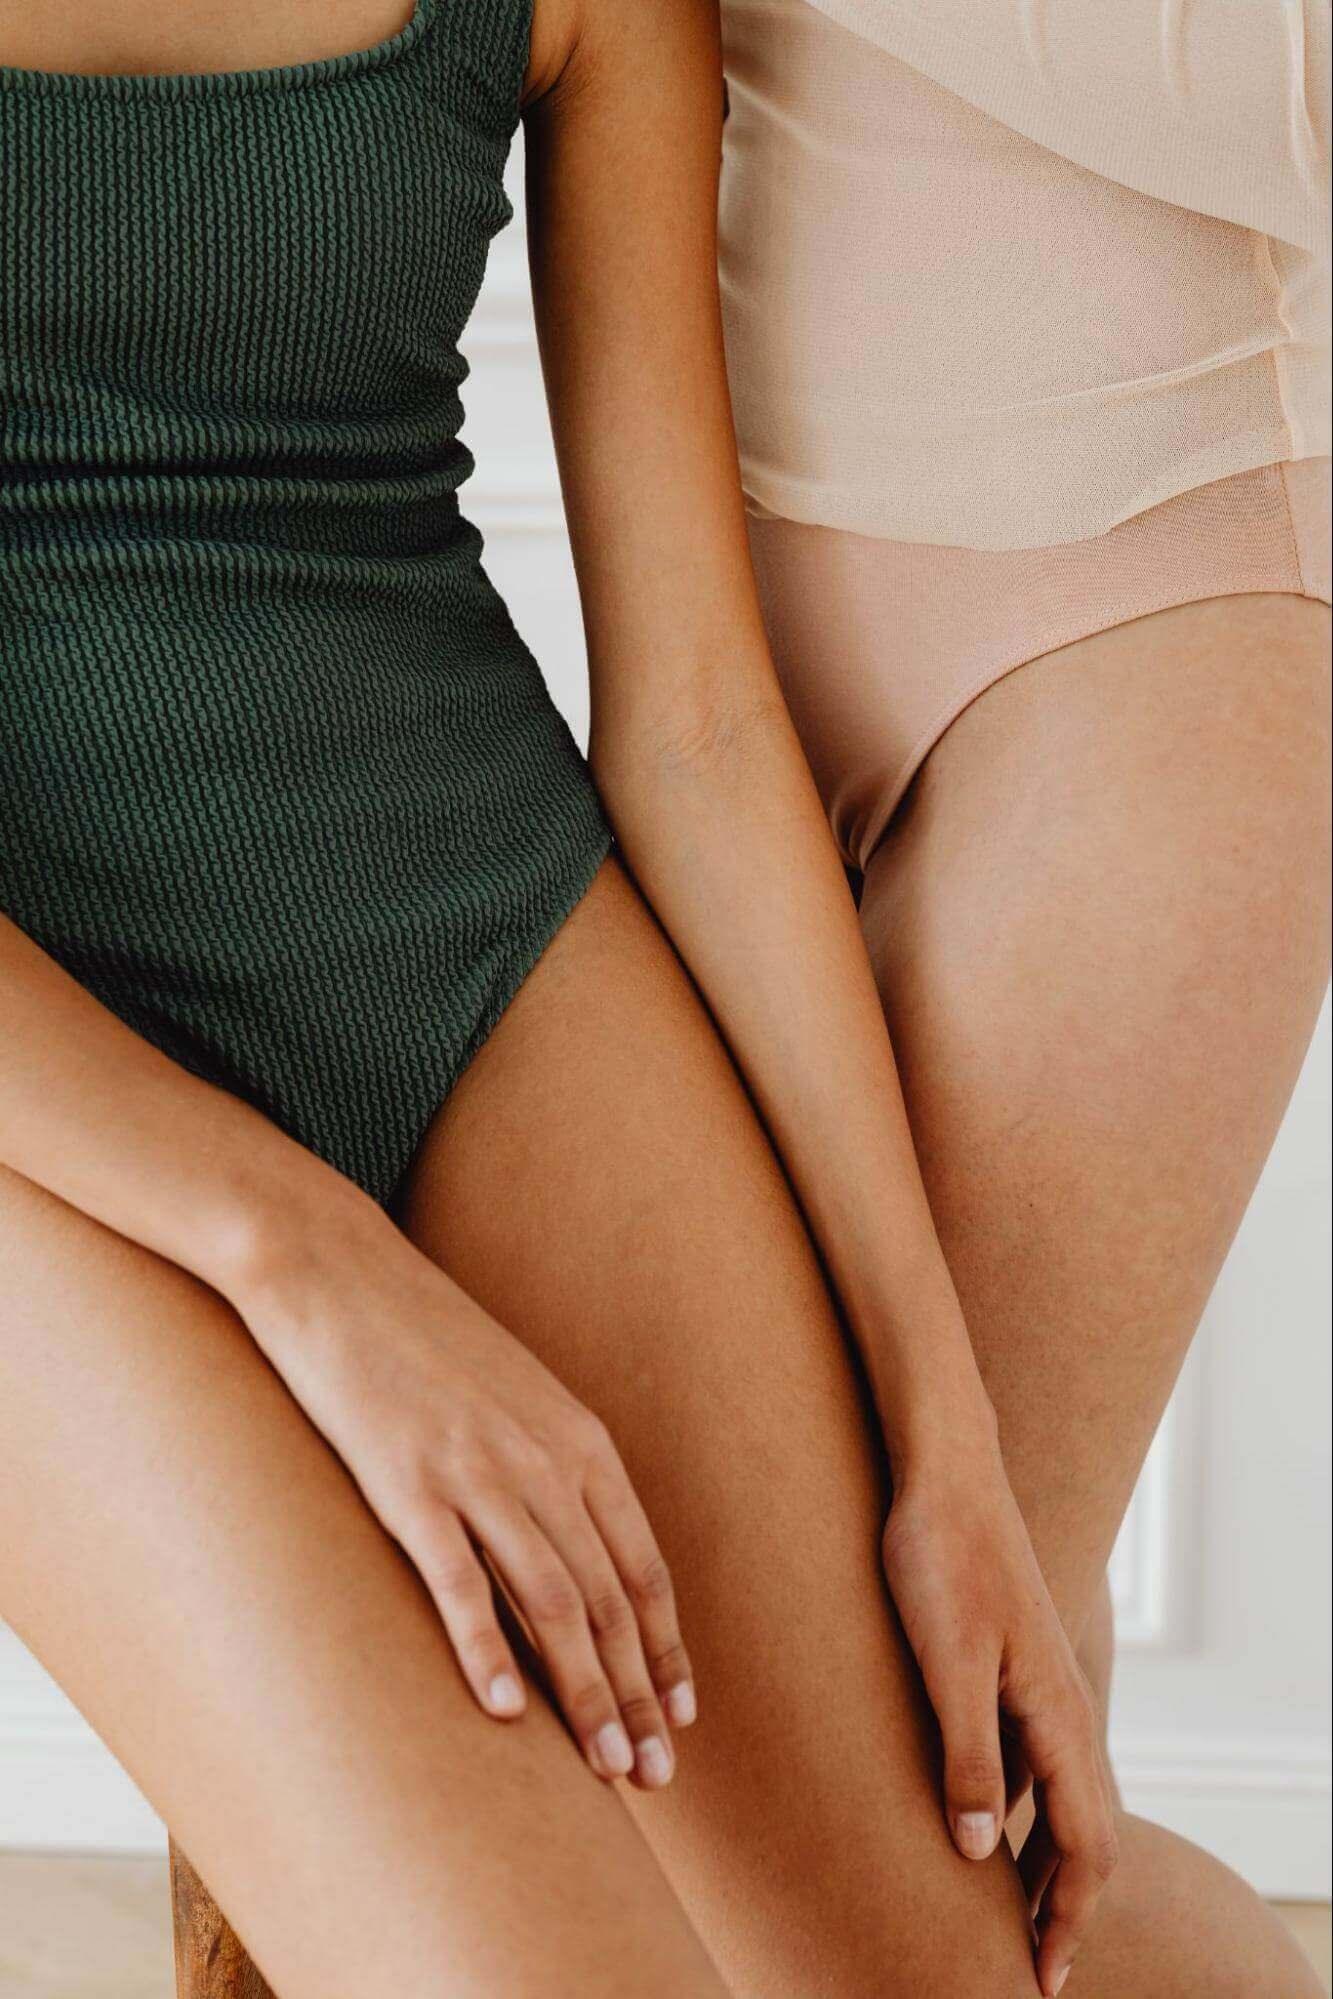 Wearing Shapewear Every day Can Cause Some Health Risks